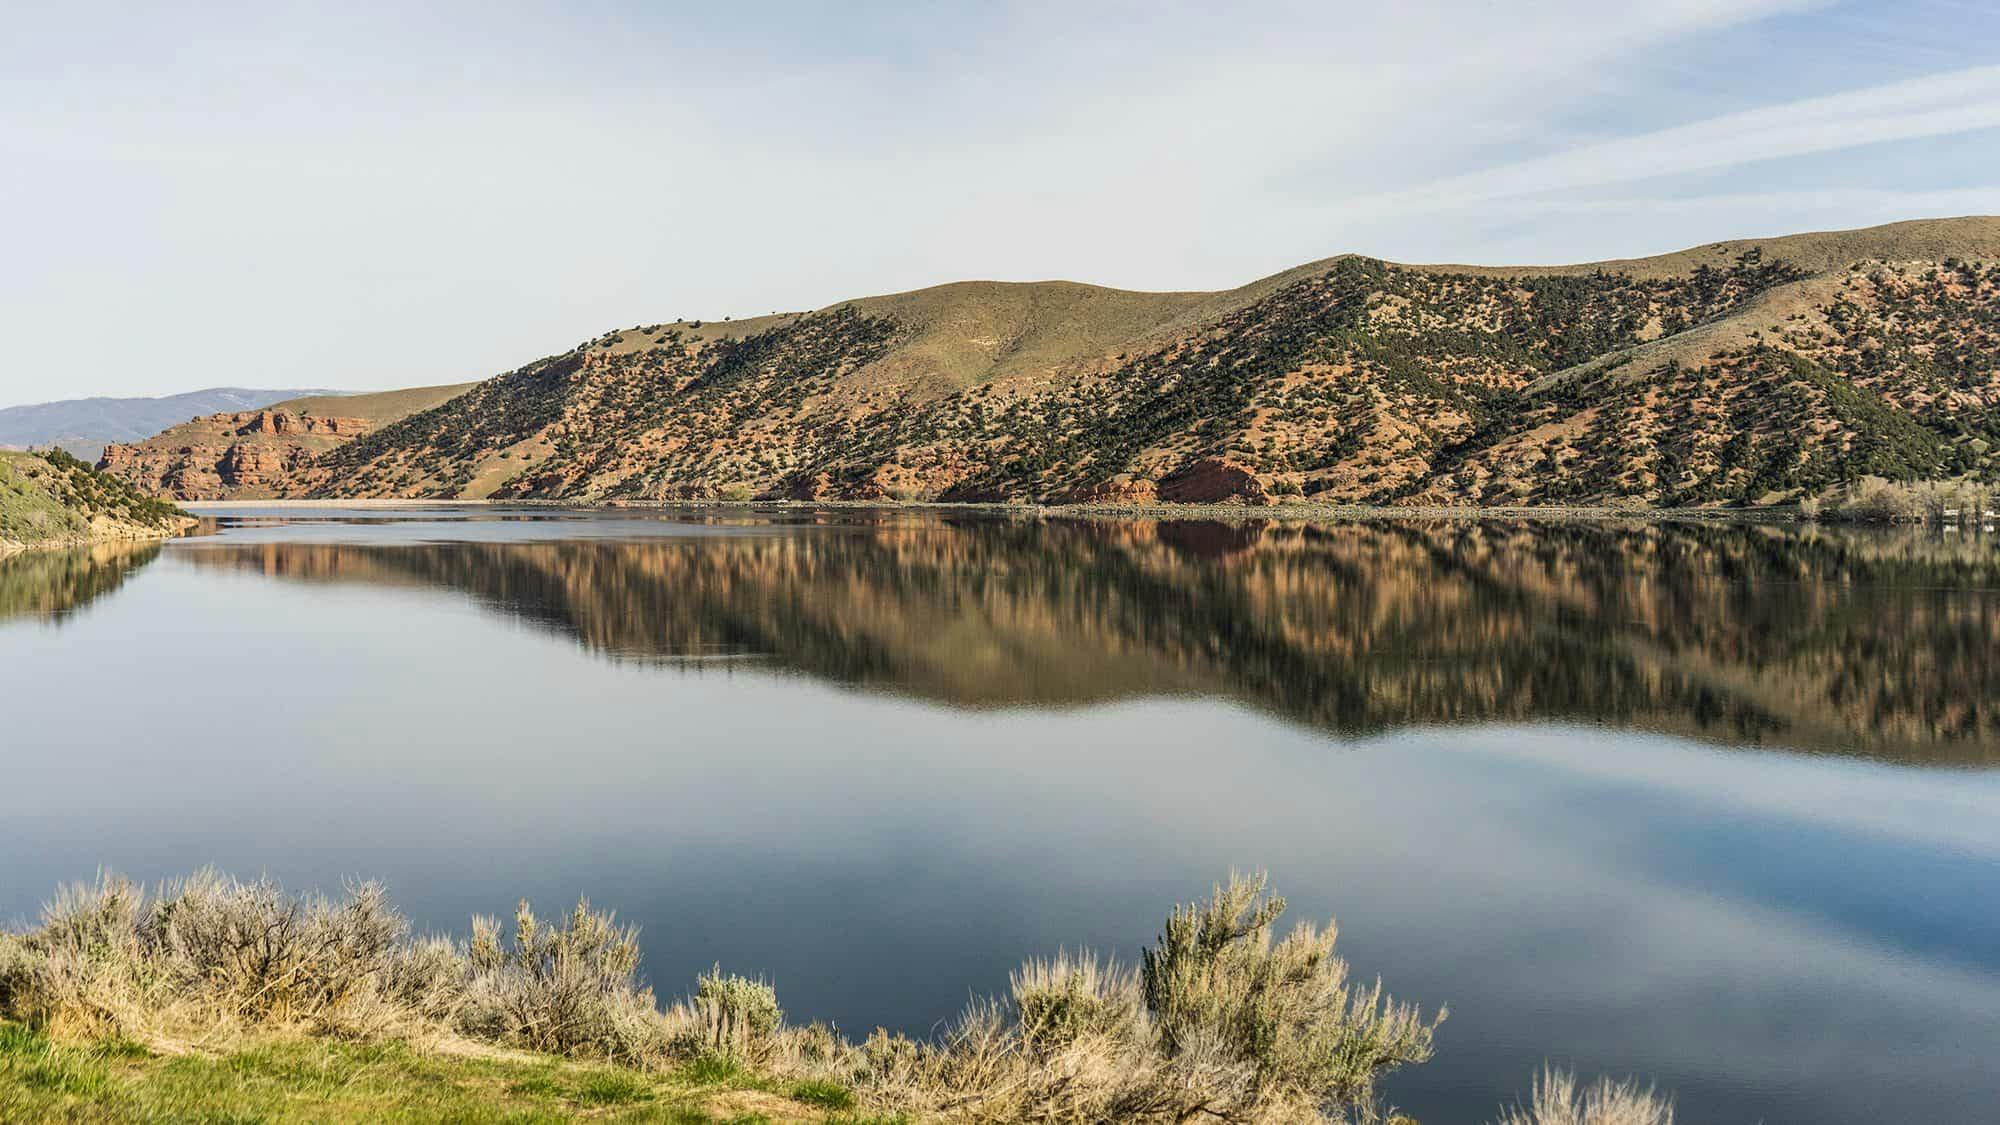 A large reservoir with mountain ranges and trees in the background.